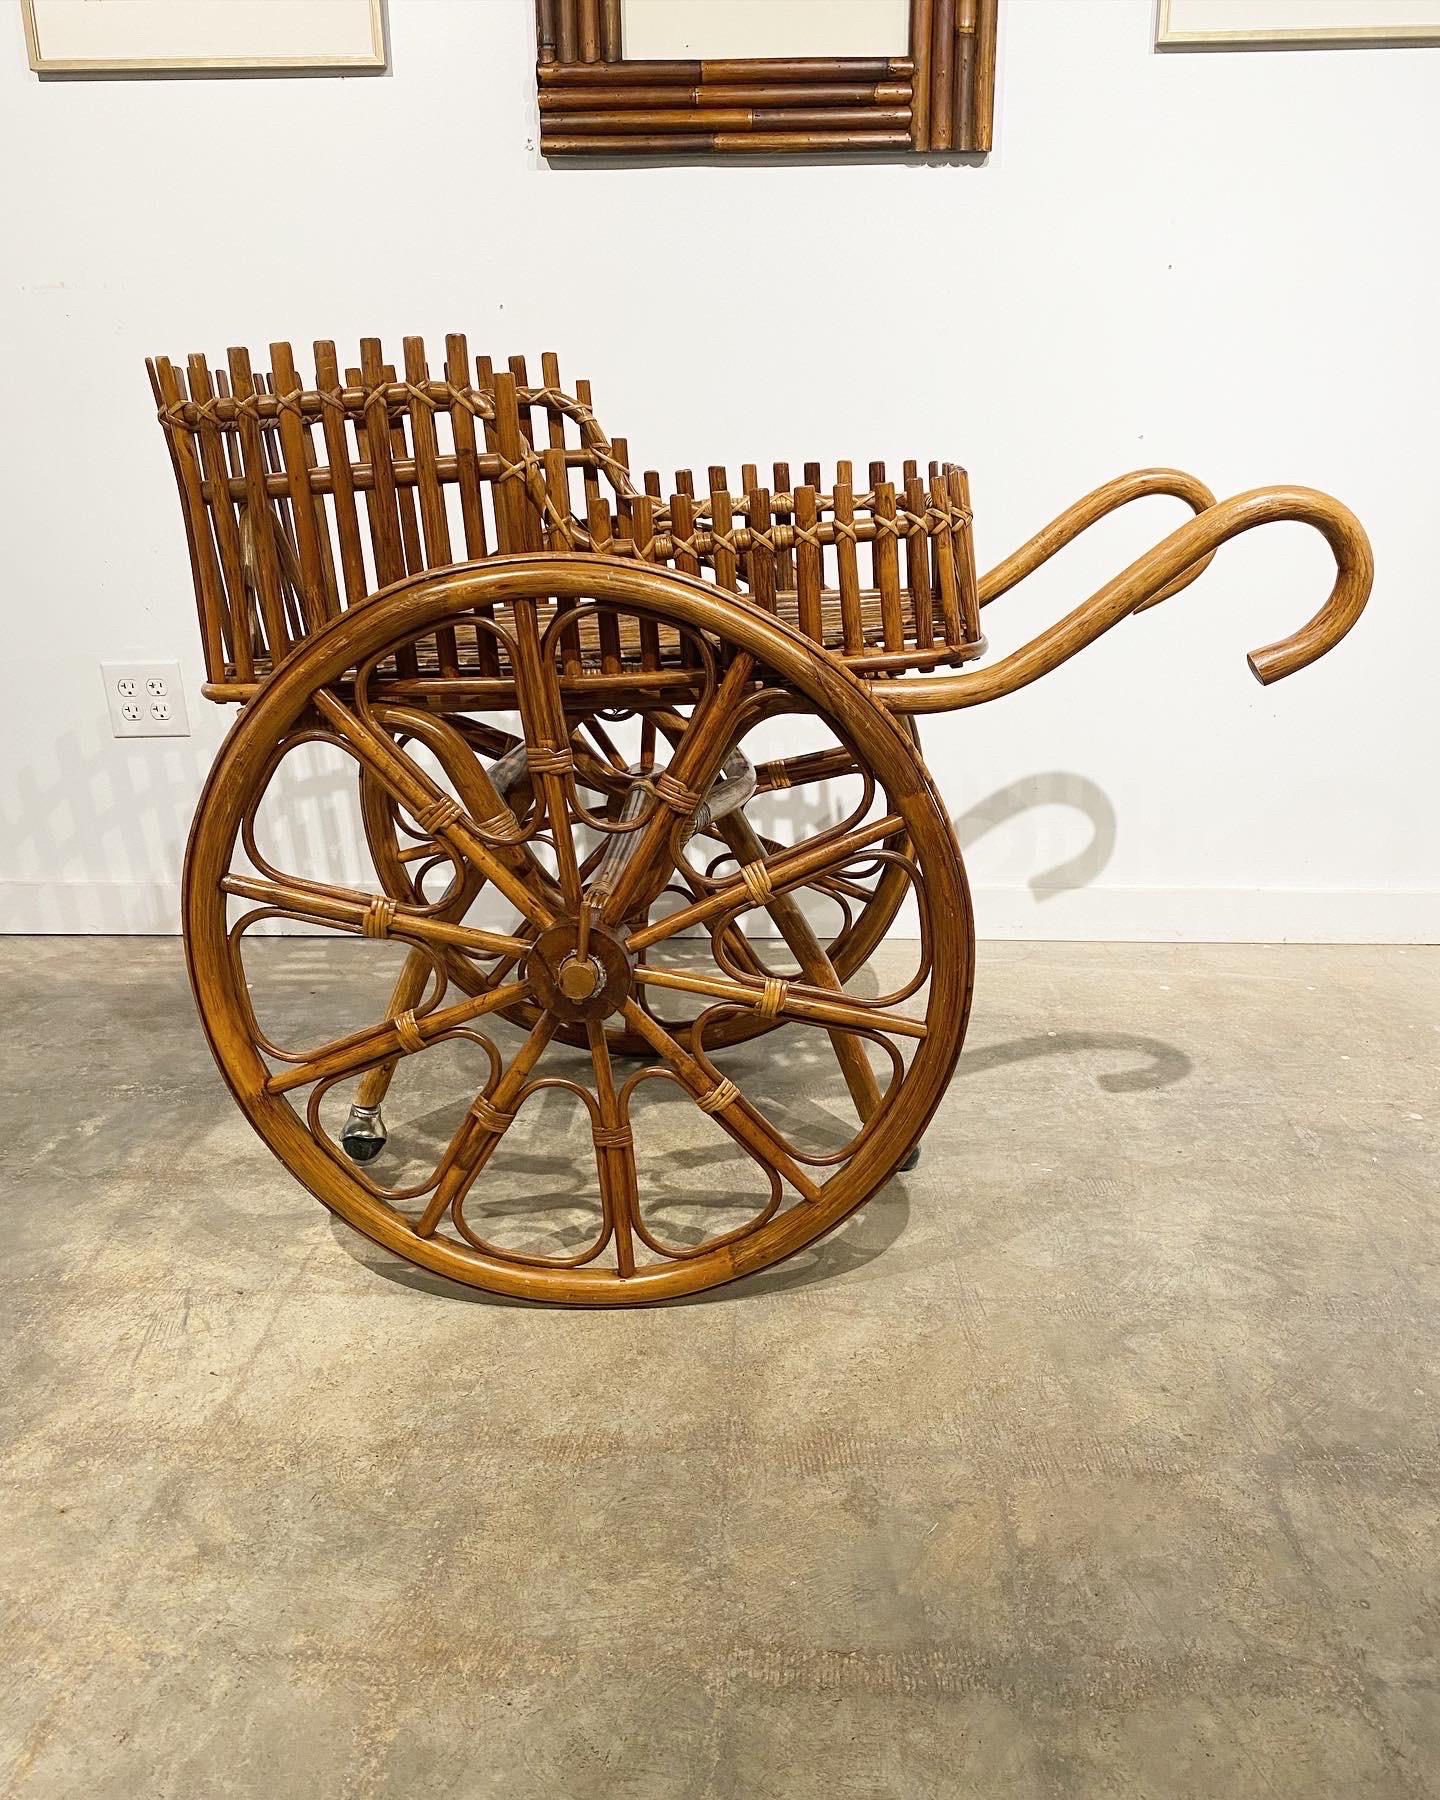 An oversized bamboo cart, likely Italian. This piece functions and rolls as it should. The woven construction is sturdy and attractive. Minor loss of the rattan wrap in places, although structurally sound.